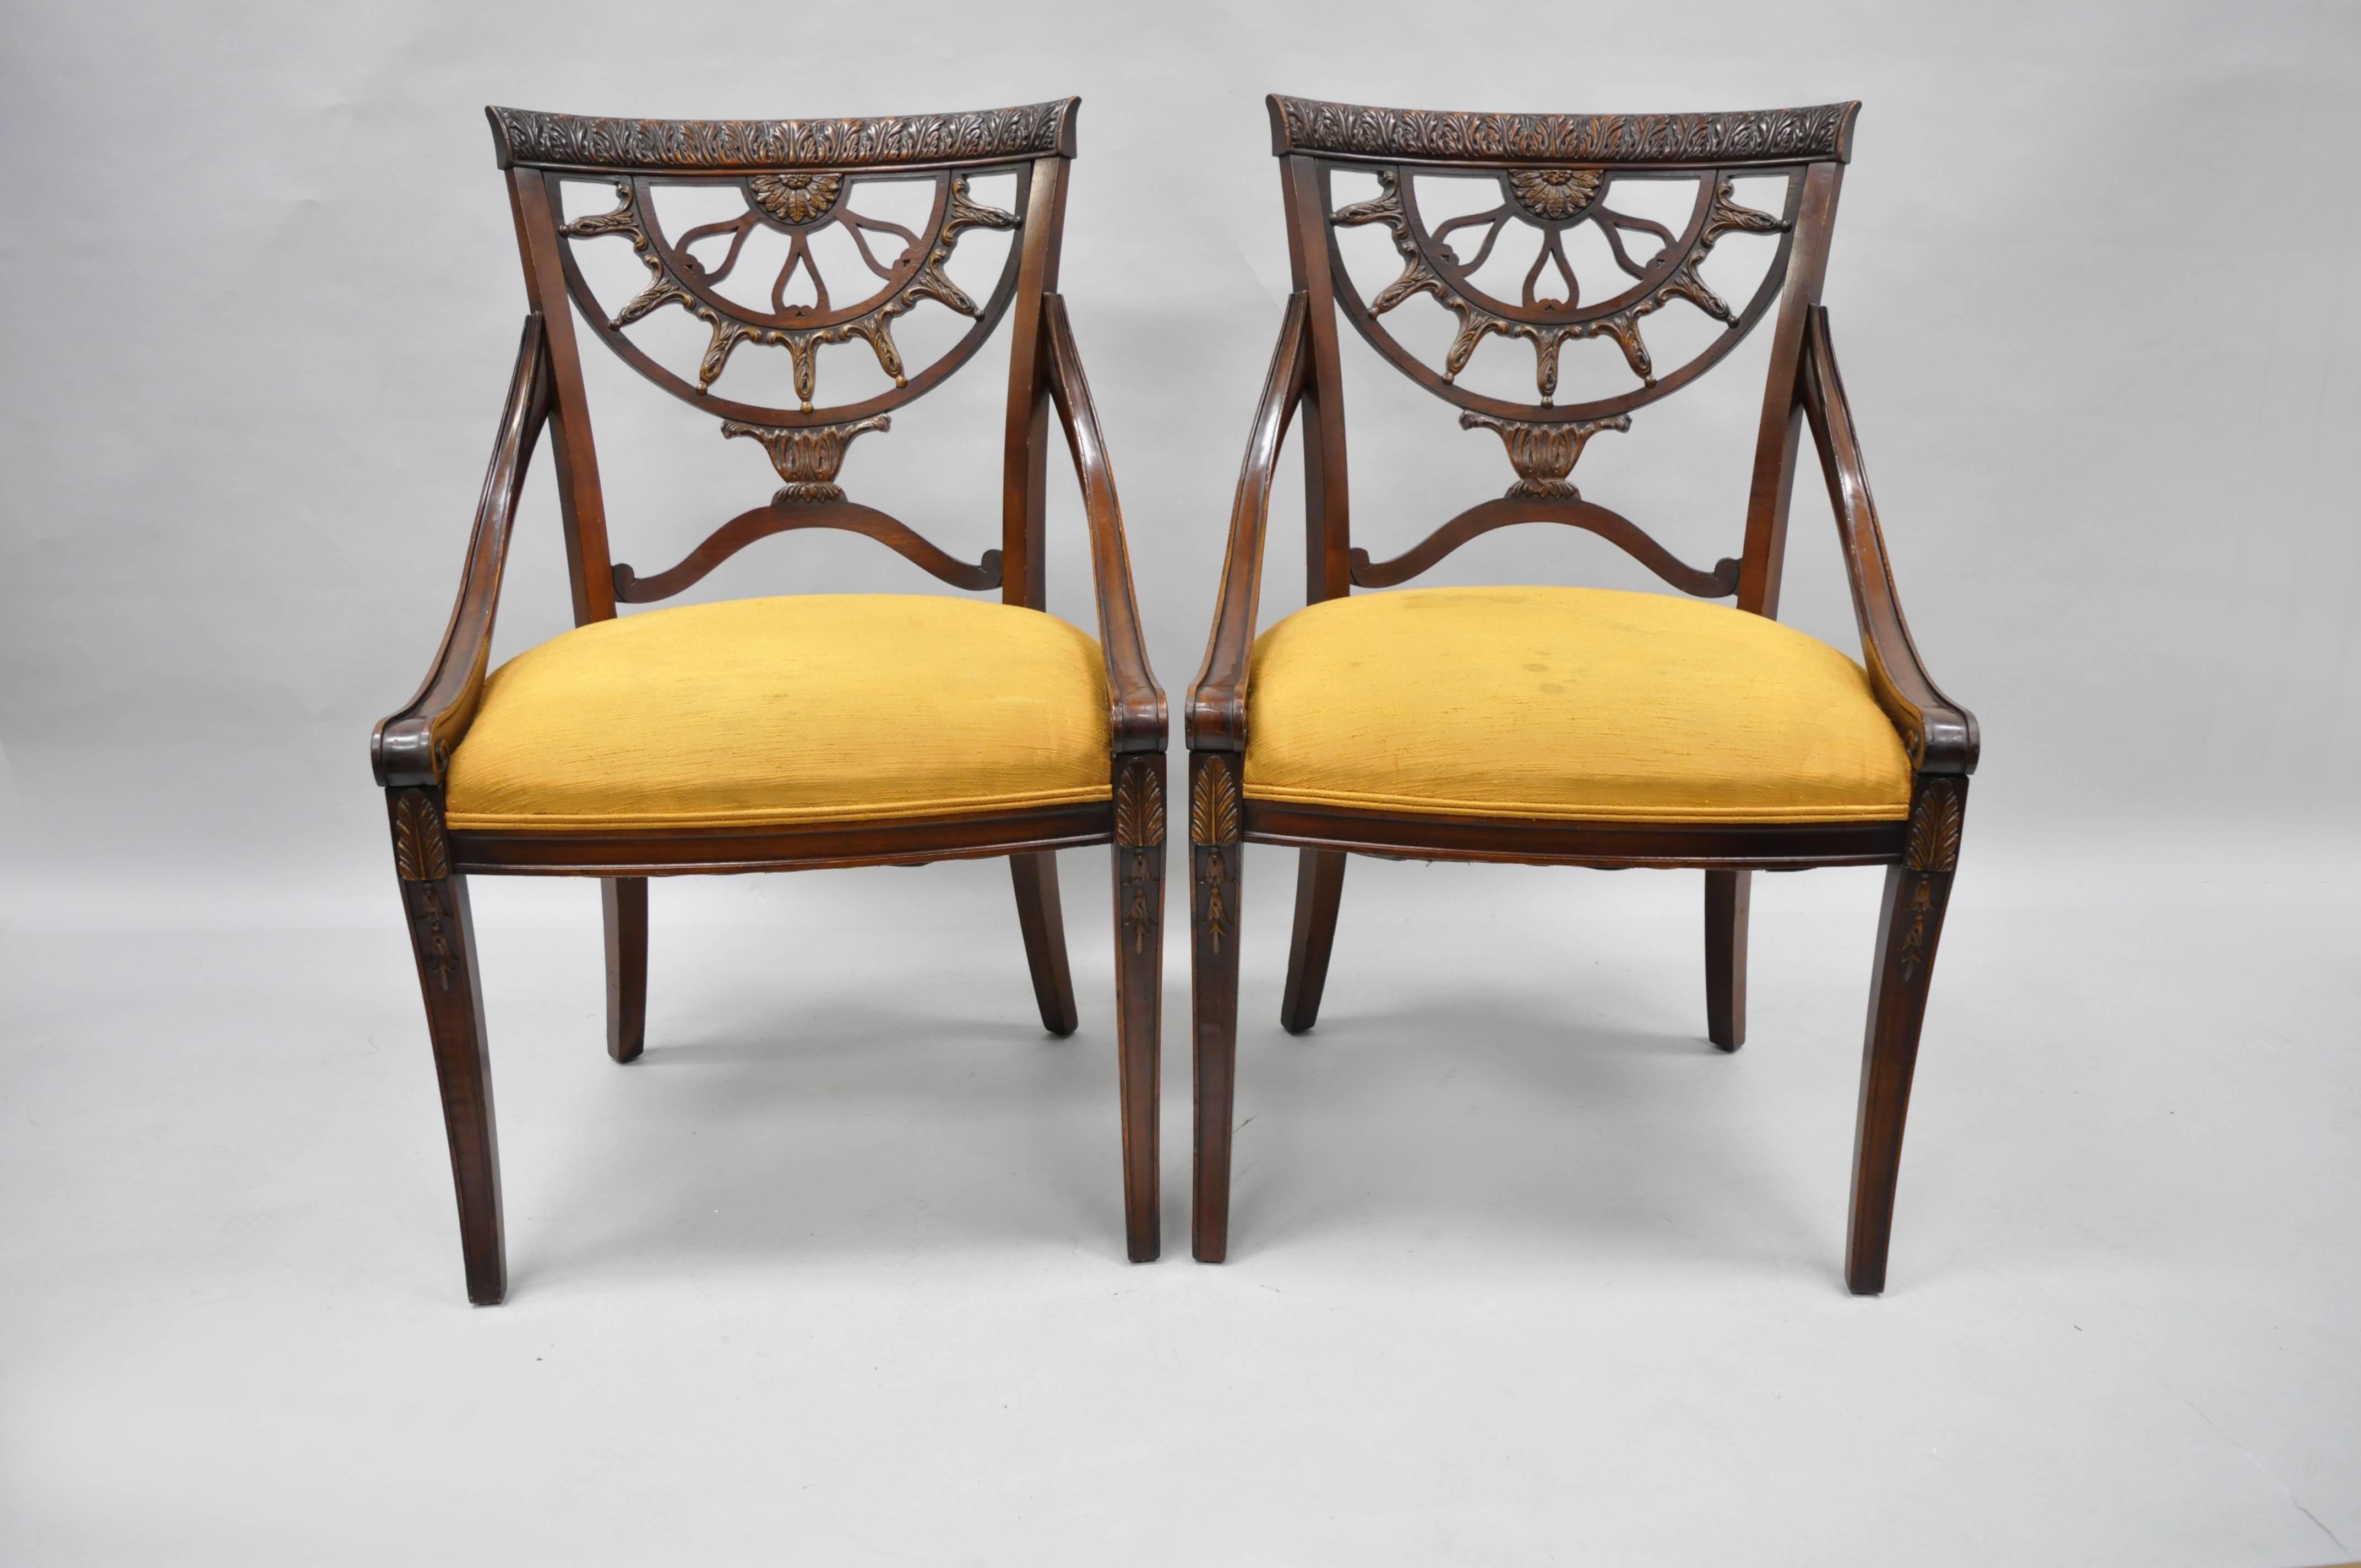 Pair of vintage French regency style mahogany dining room chairs. Item features pierce carved mahogany frames, saber legs, shapely hip rests, elegant regency form.
Measurements: 37